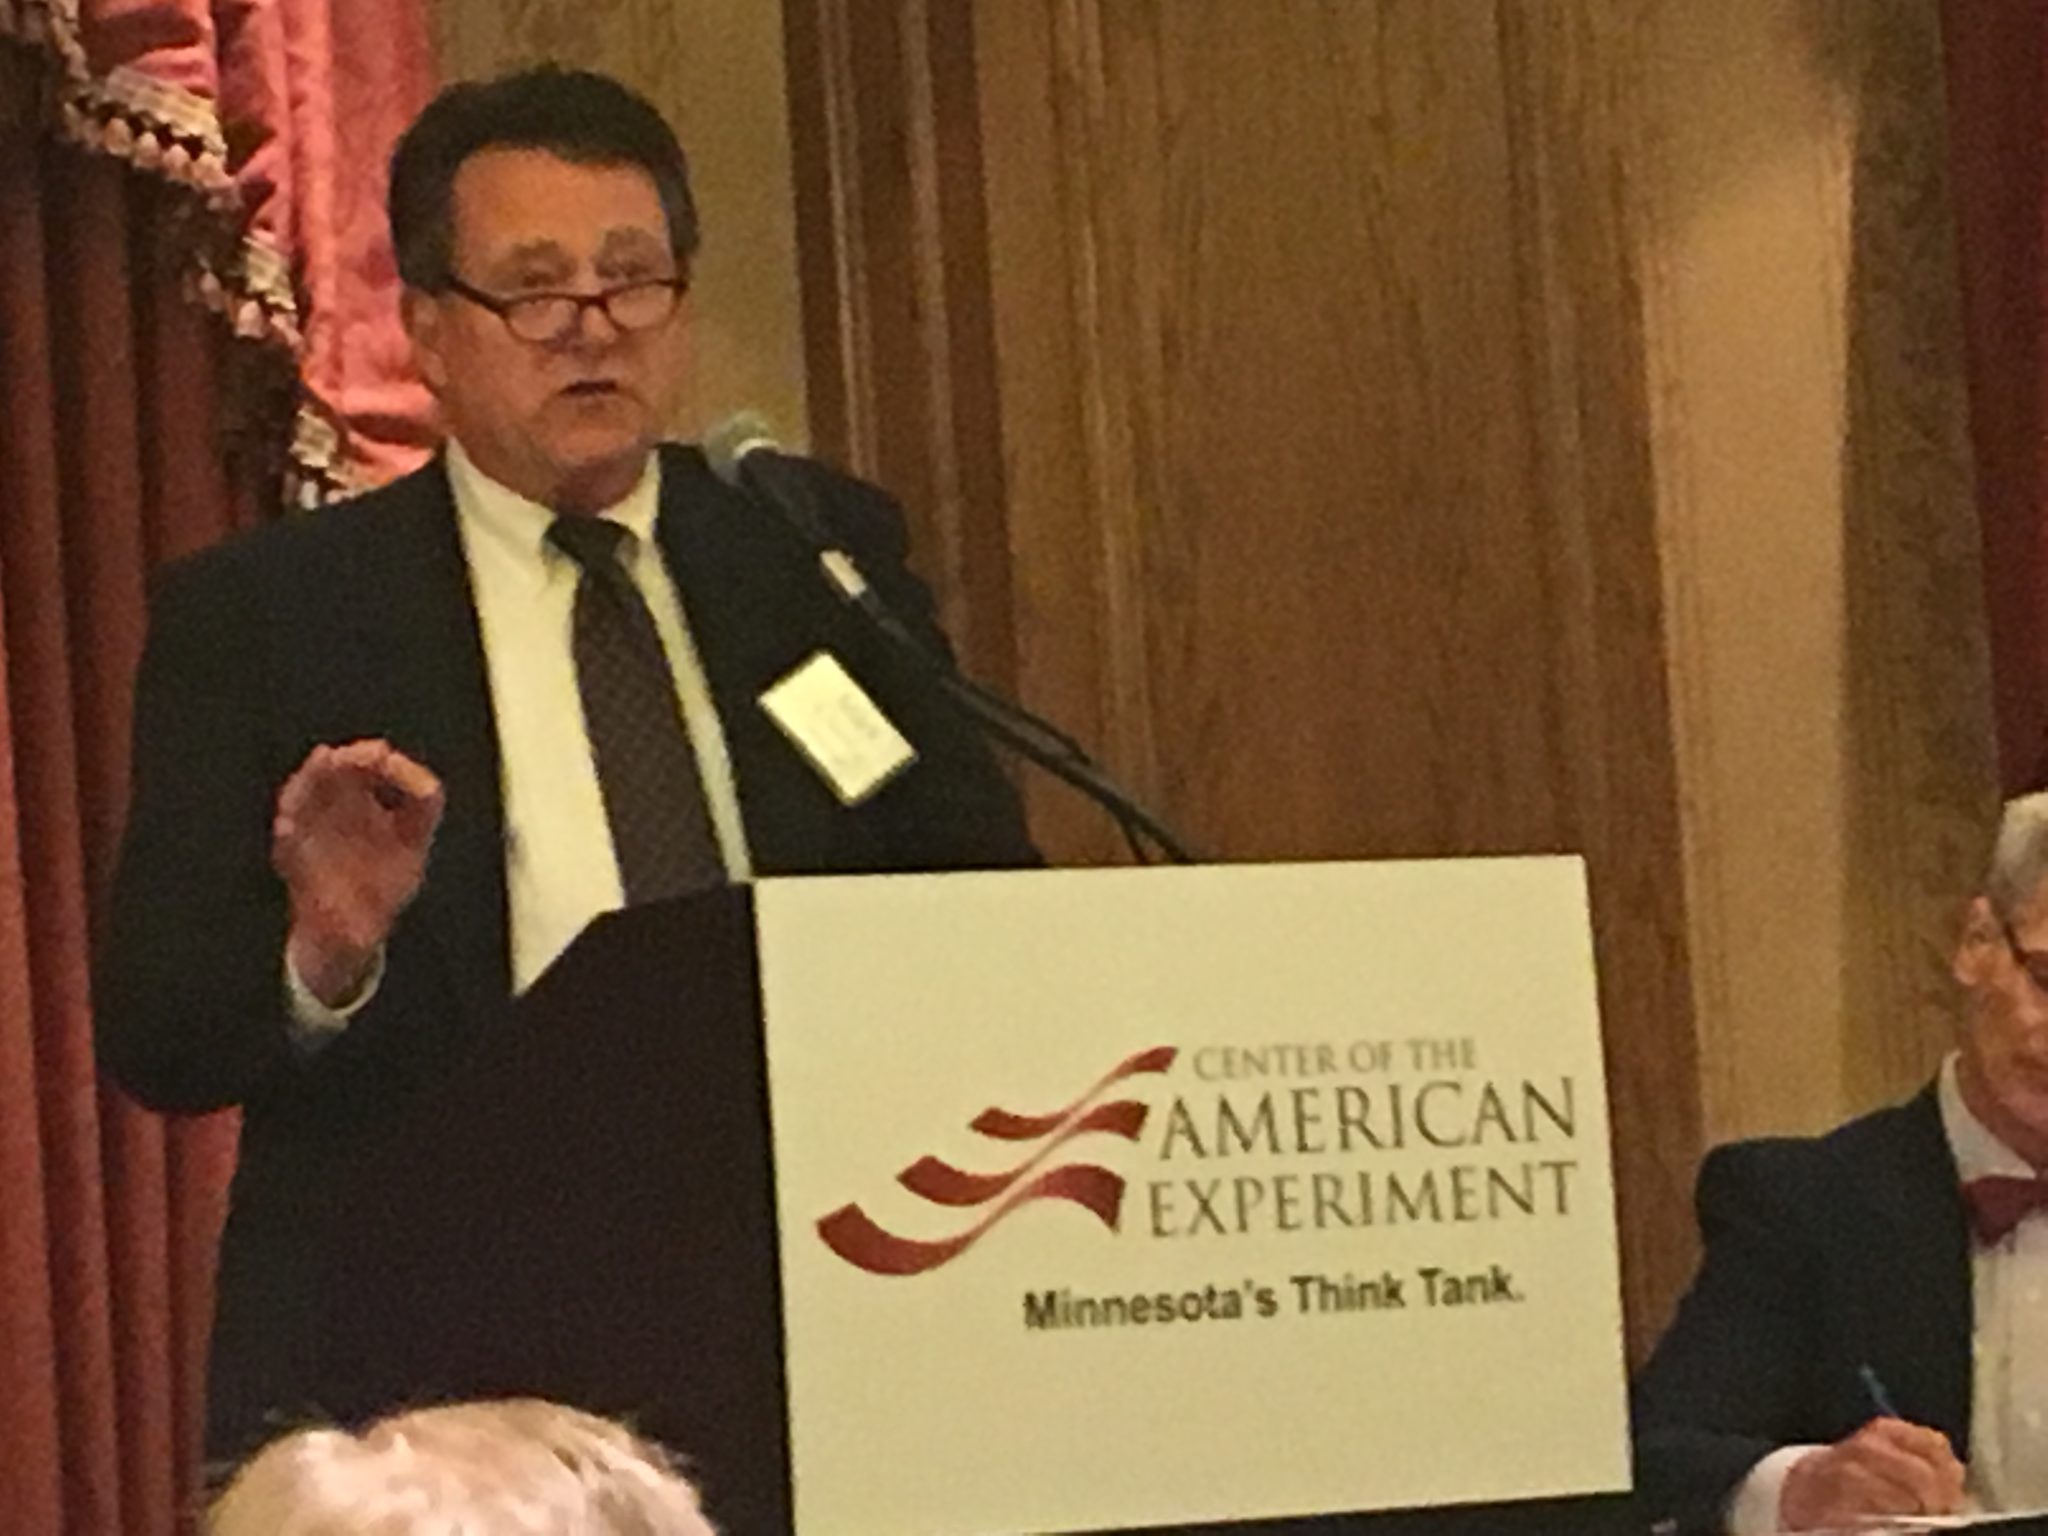 Dr. Mark Perry spoke at American Experiment's BIG minimum wage debate that drew over 200 people.